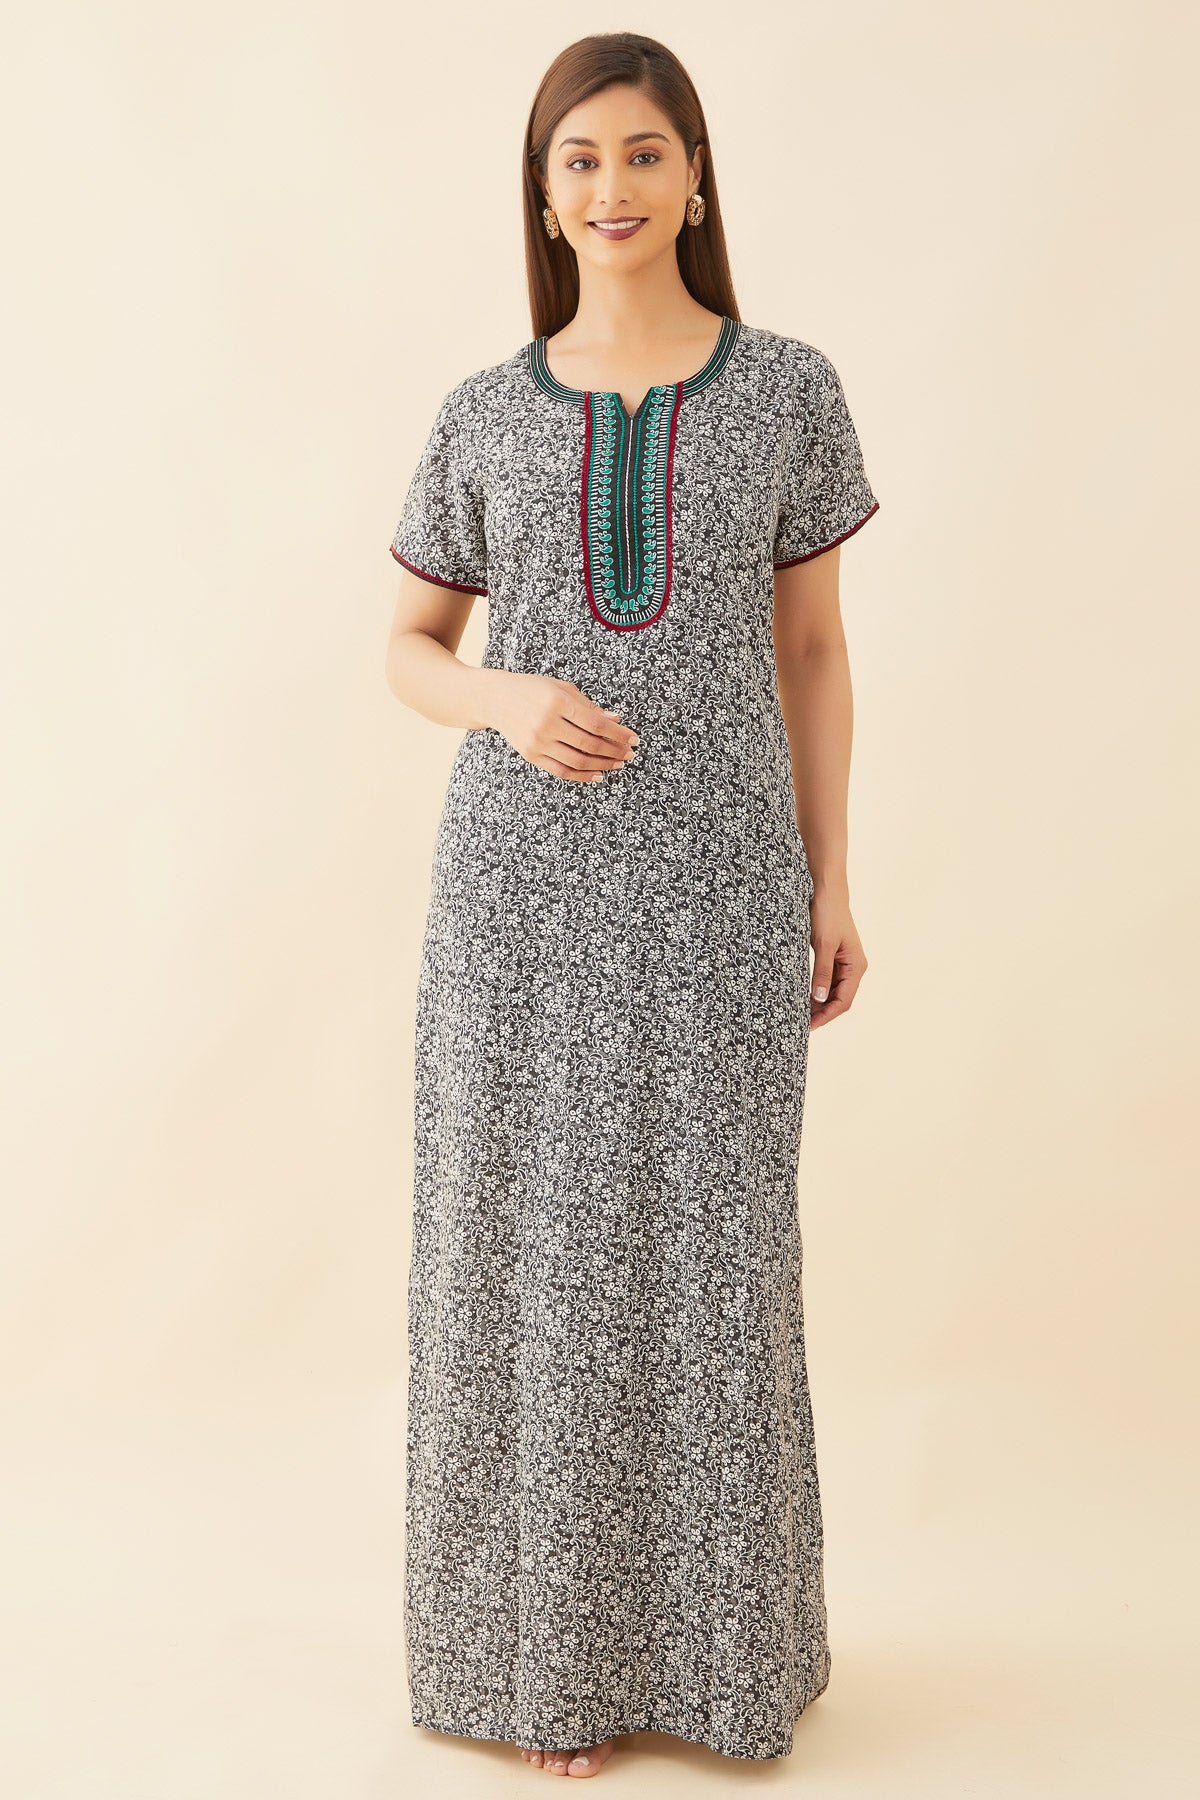 All Over Floral Print With Contrast Paisley Embroidered Yoke Nighty - Grey